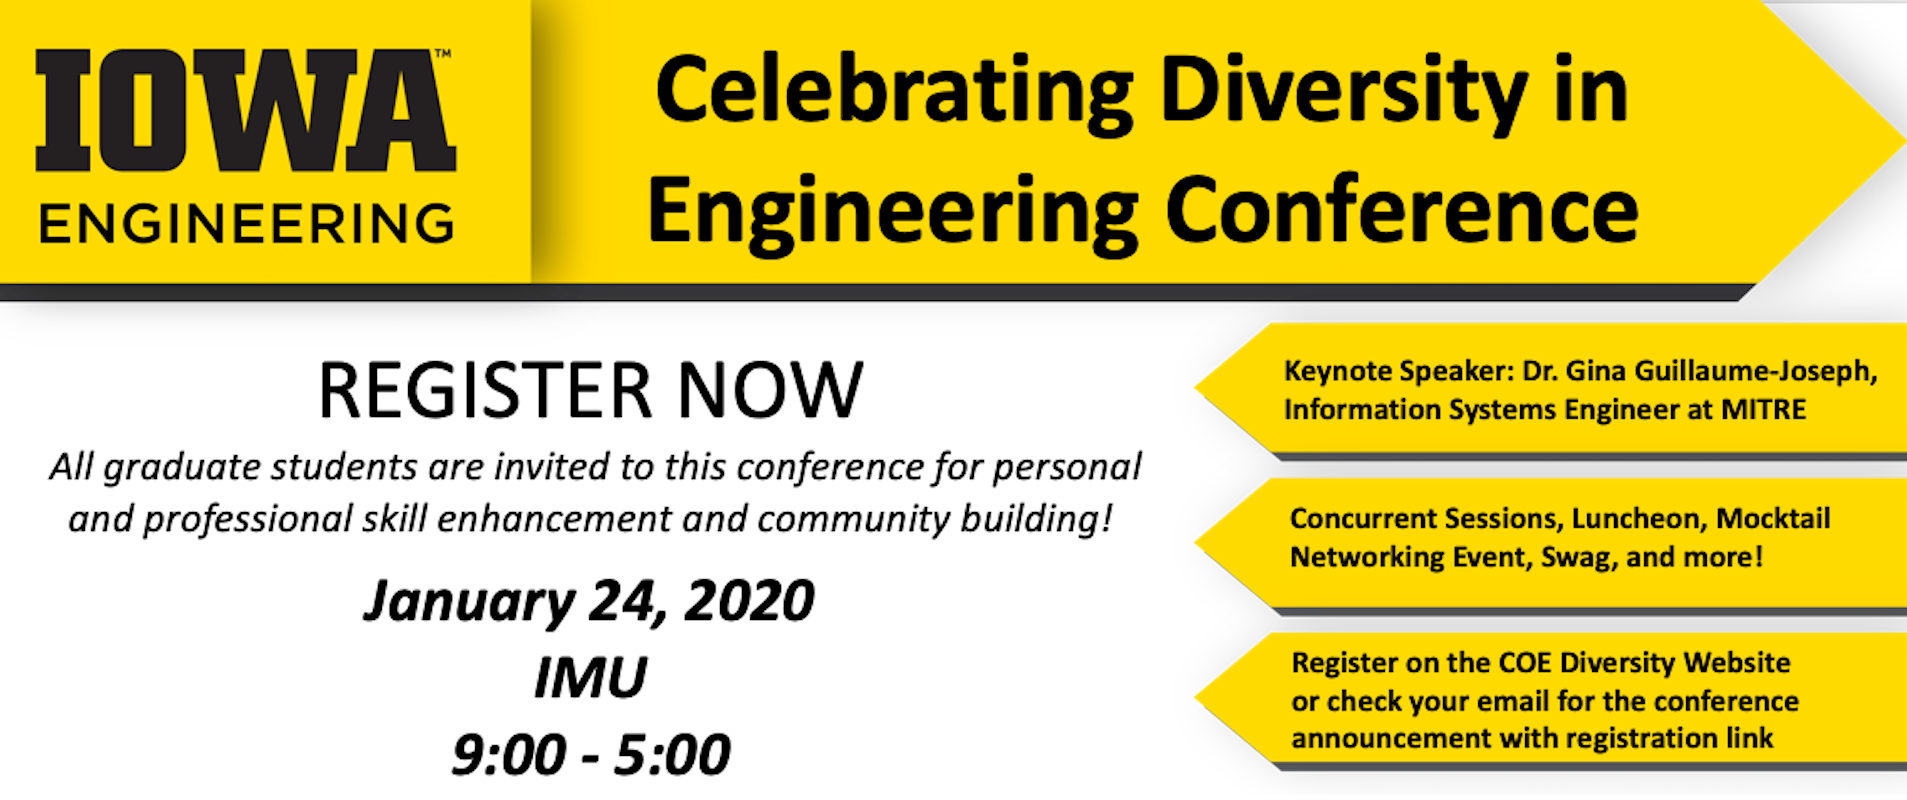 Celebrating Diversity in Engineering Conference